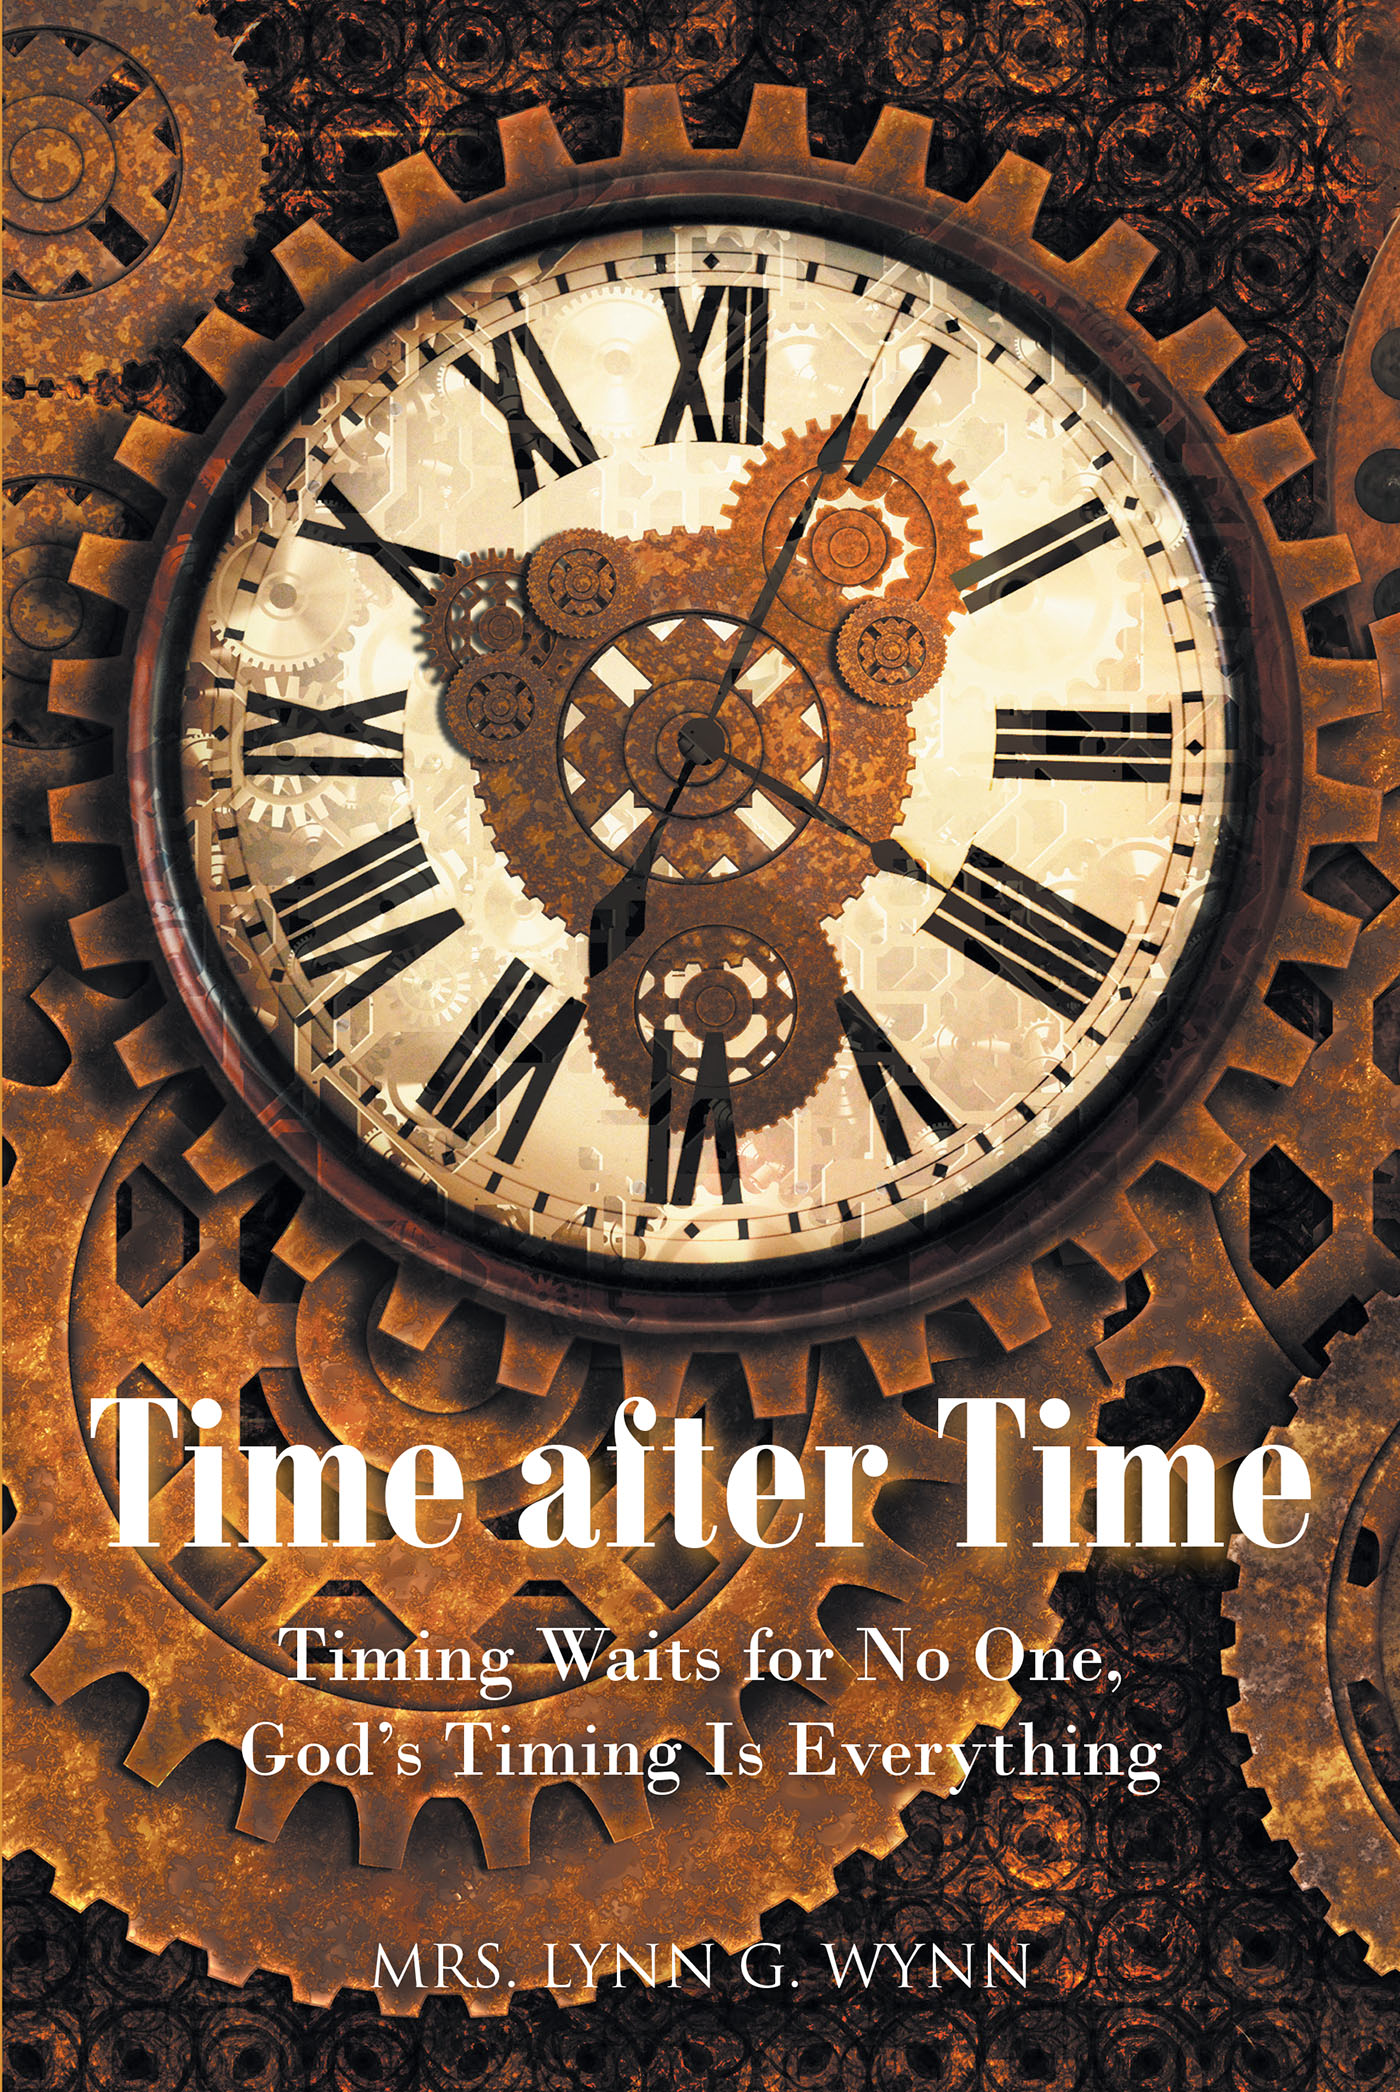 Mrs. Lynn G. Wynn’s Newly Released “Time after Time: Timing Waits for No One, God’s Timing Is Everything” is a Unique and Uplifting Autobiography